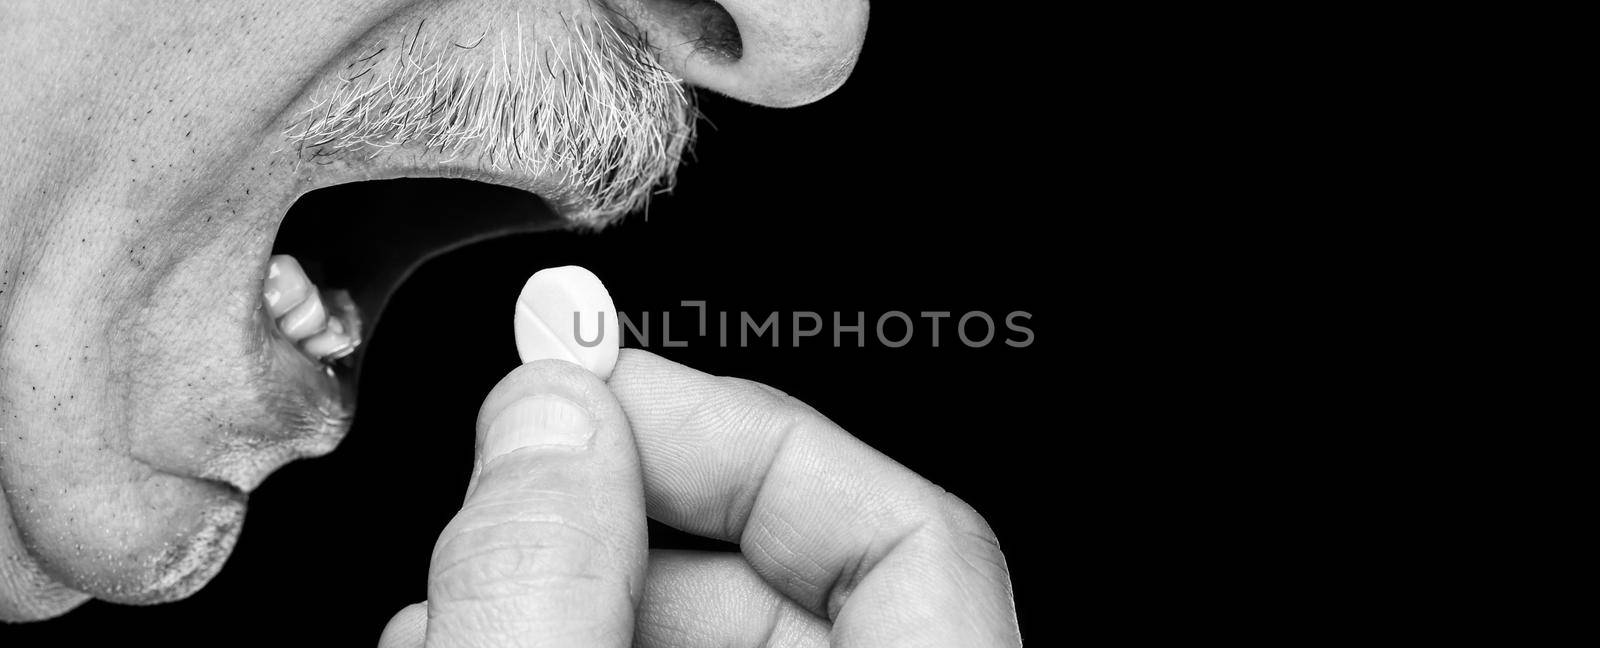 Health care concept. Close-up black and white image of an old man wants to take a pill isolated on black background with copy-space